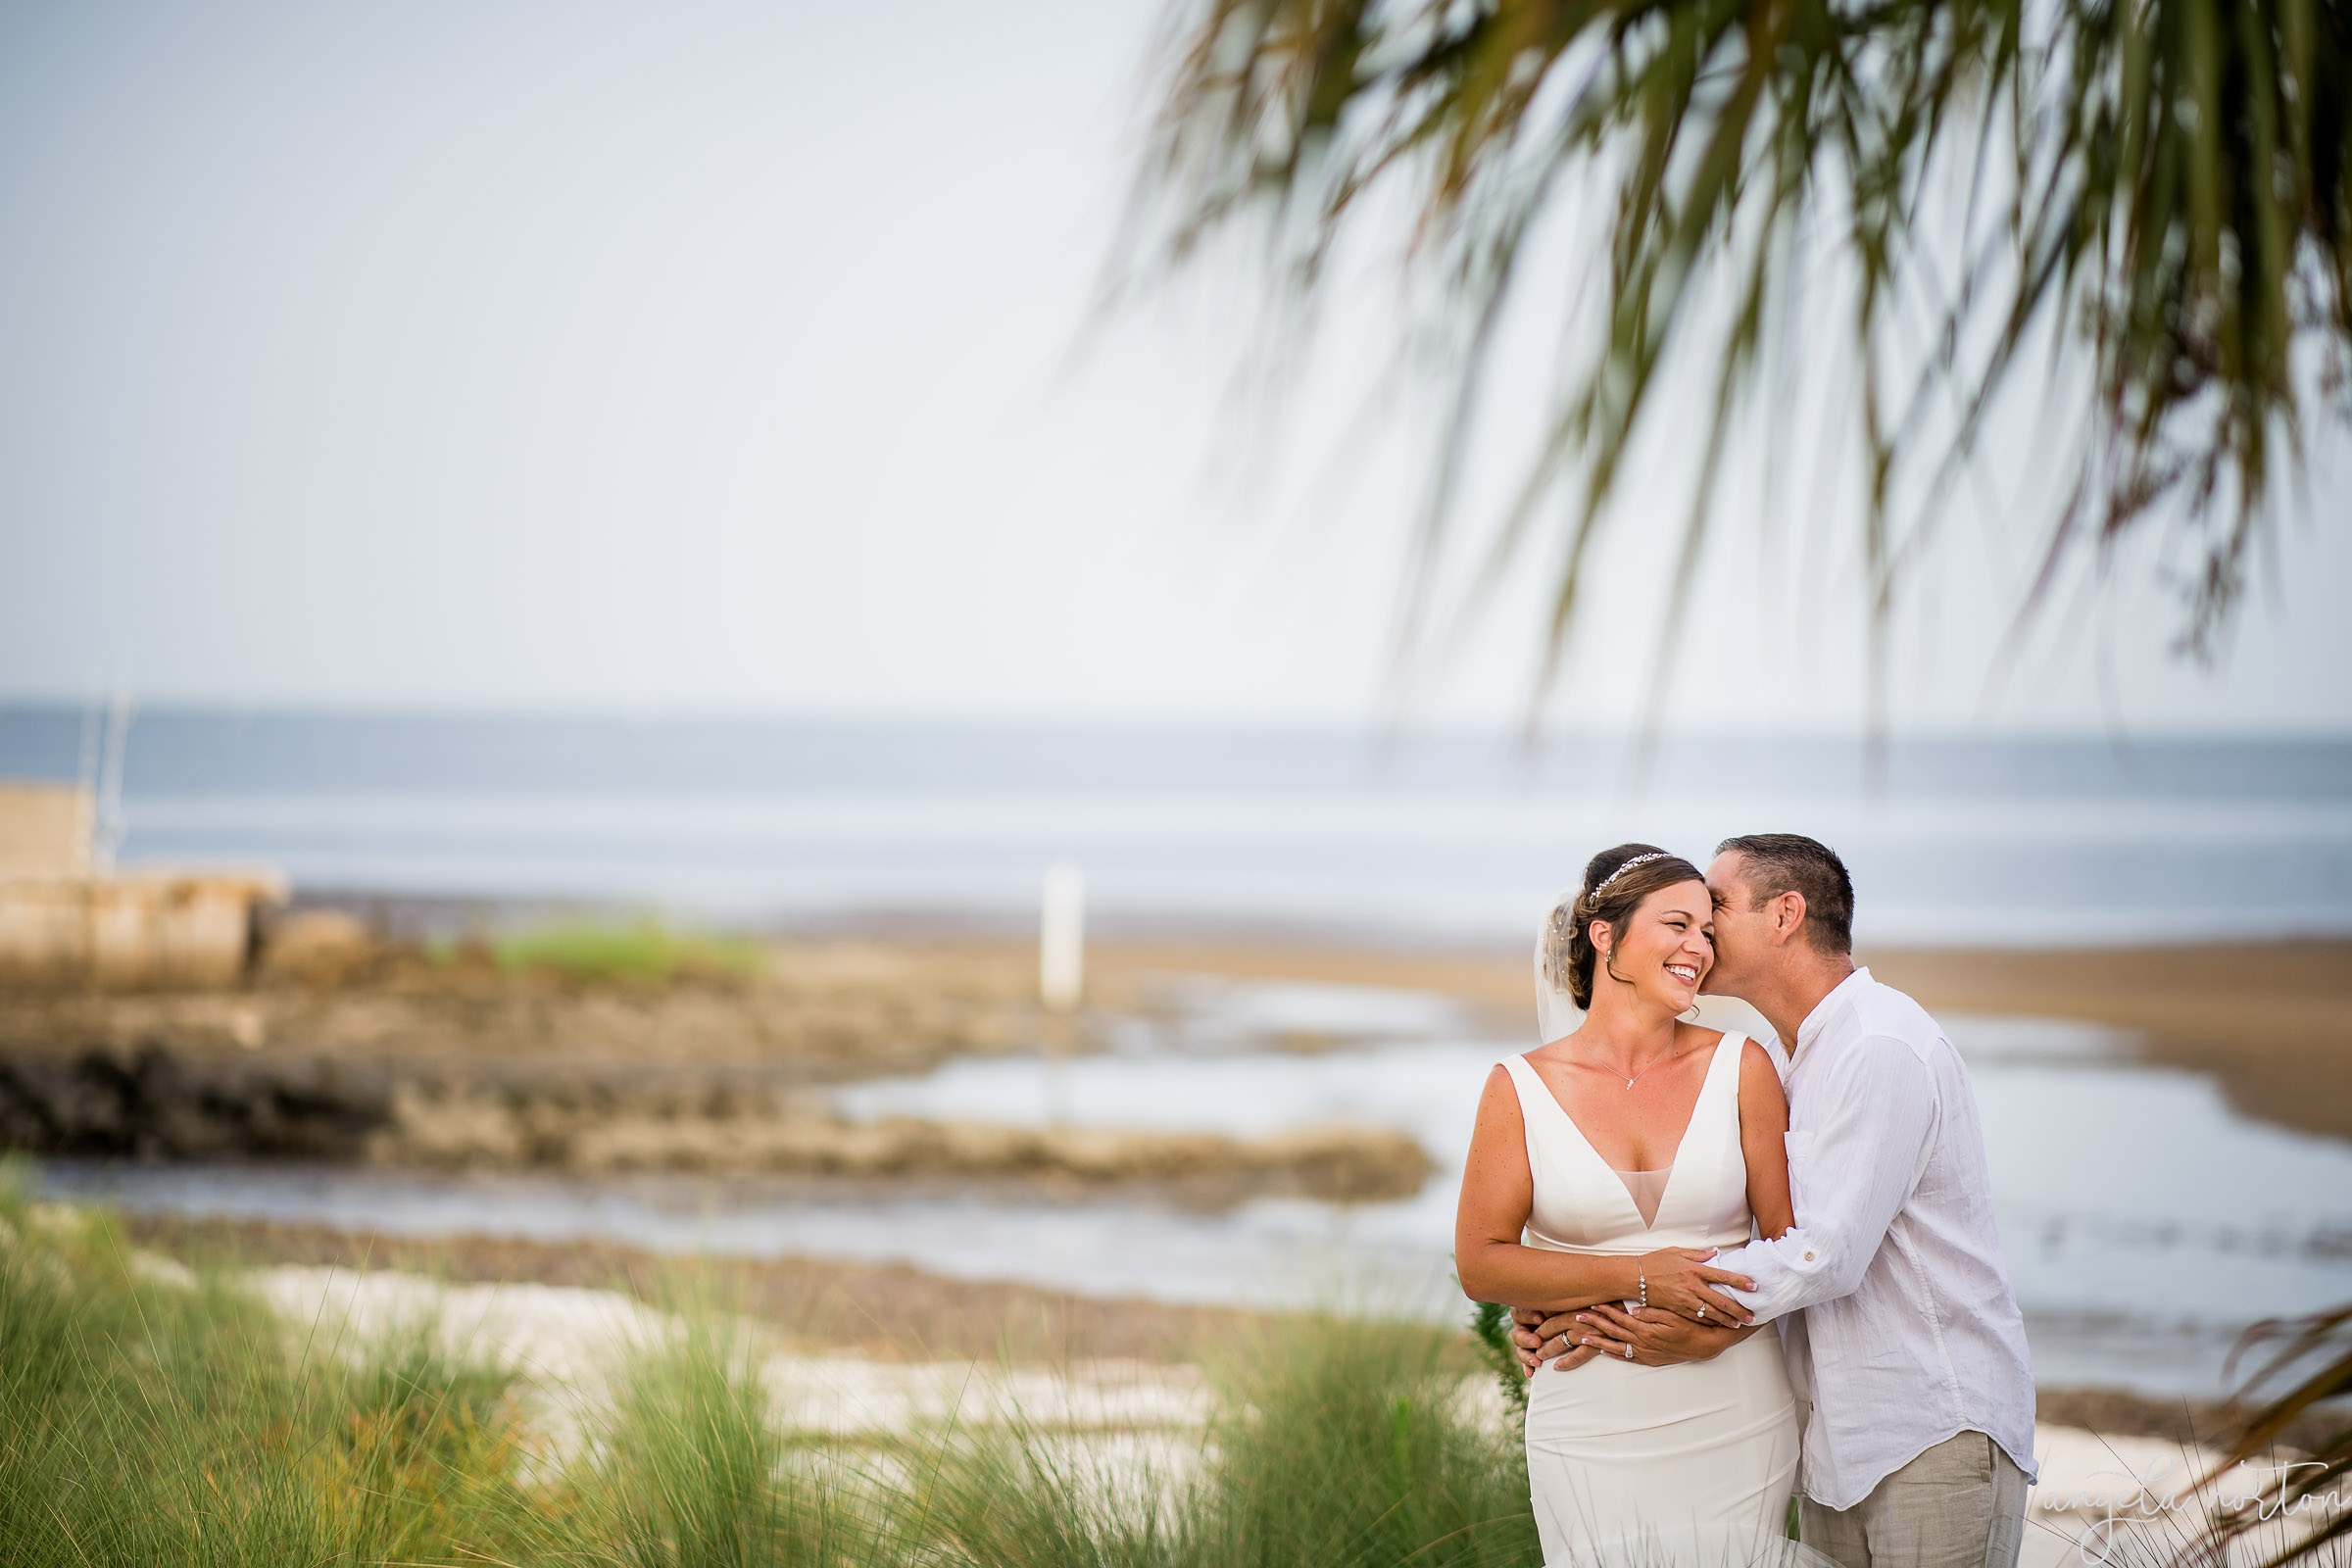 A bridal session for the bride and groom at the beach in Cedar Key Florida by Angela Norton Photography